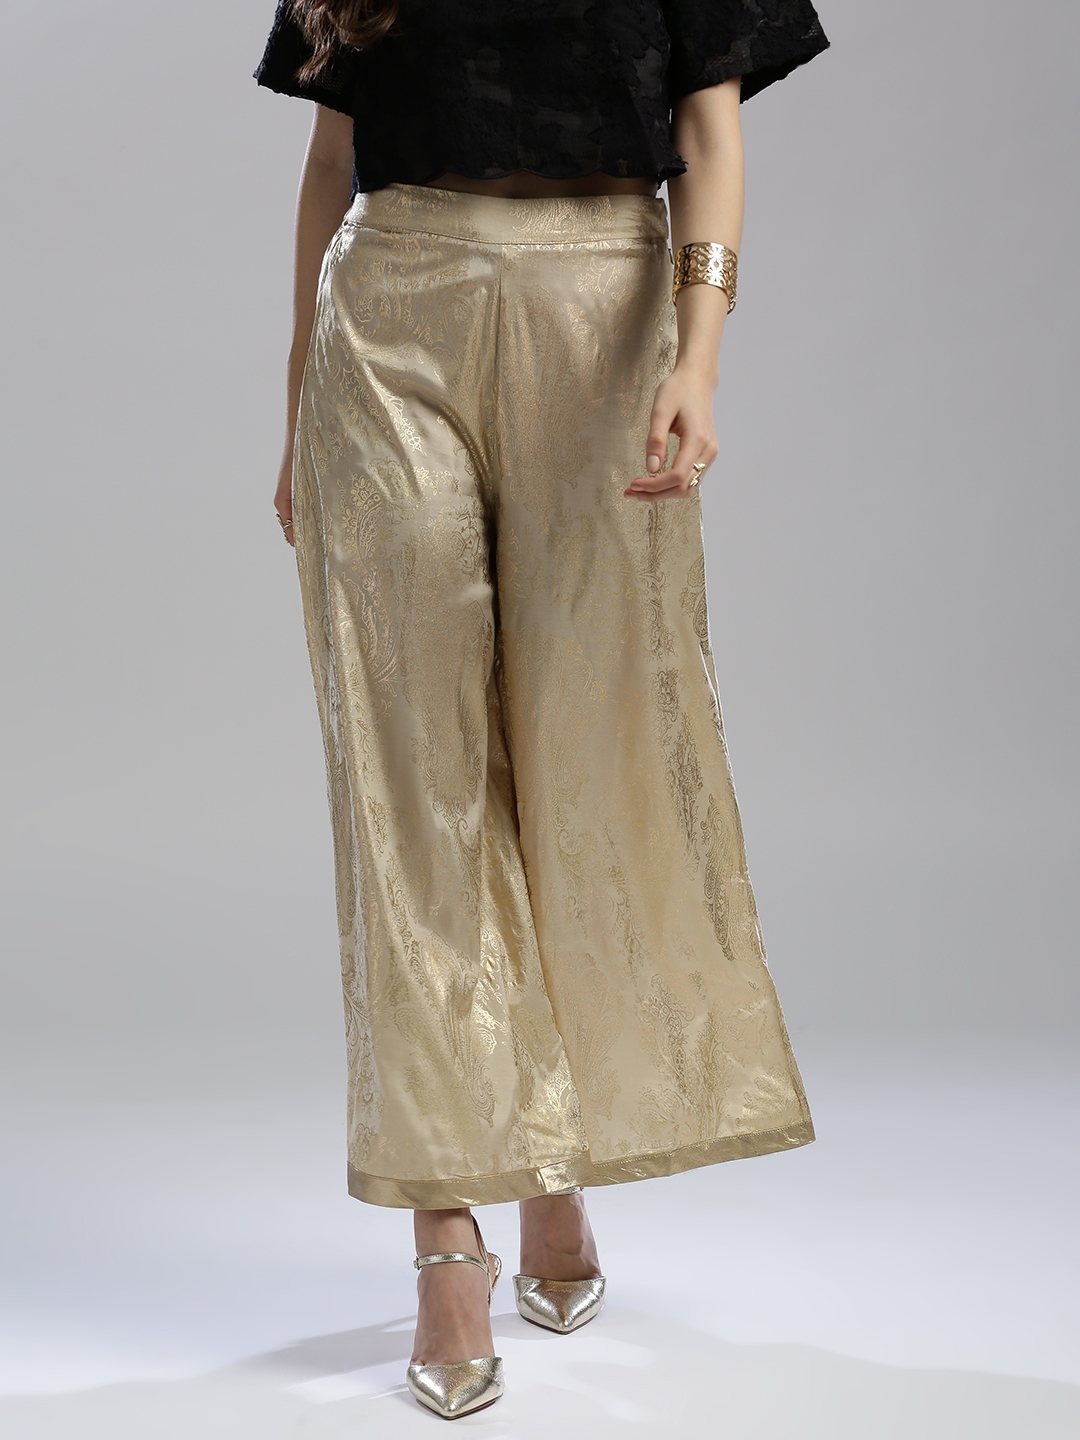 Womens Gota Design Palazzo Pant Gold Color Rayon Fabric Free Size   MENSIMPRESSION  3938113